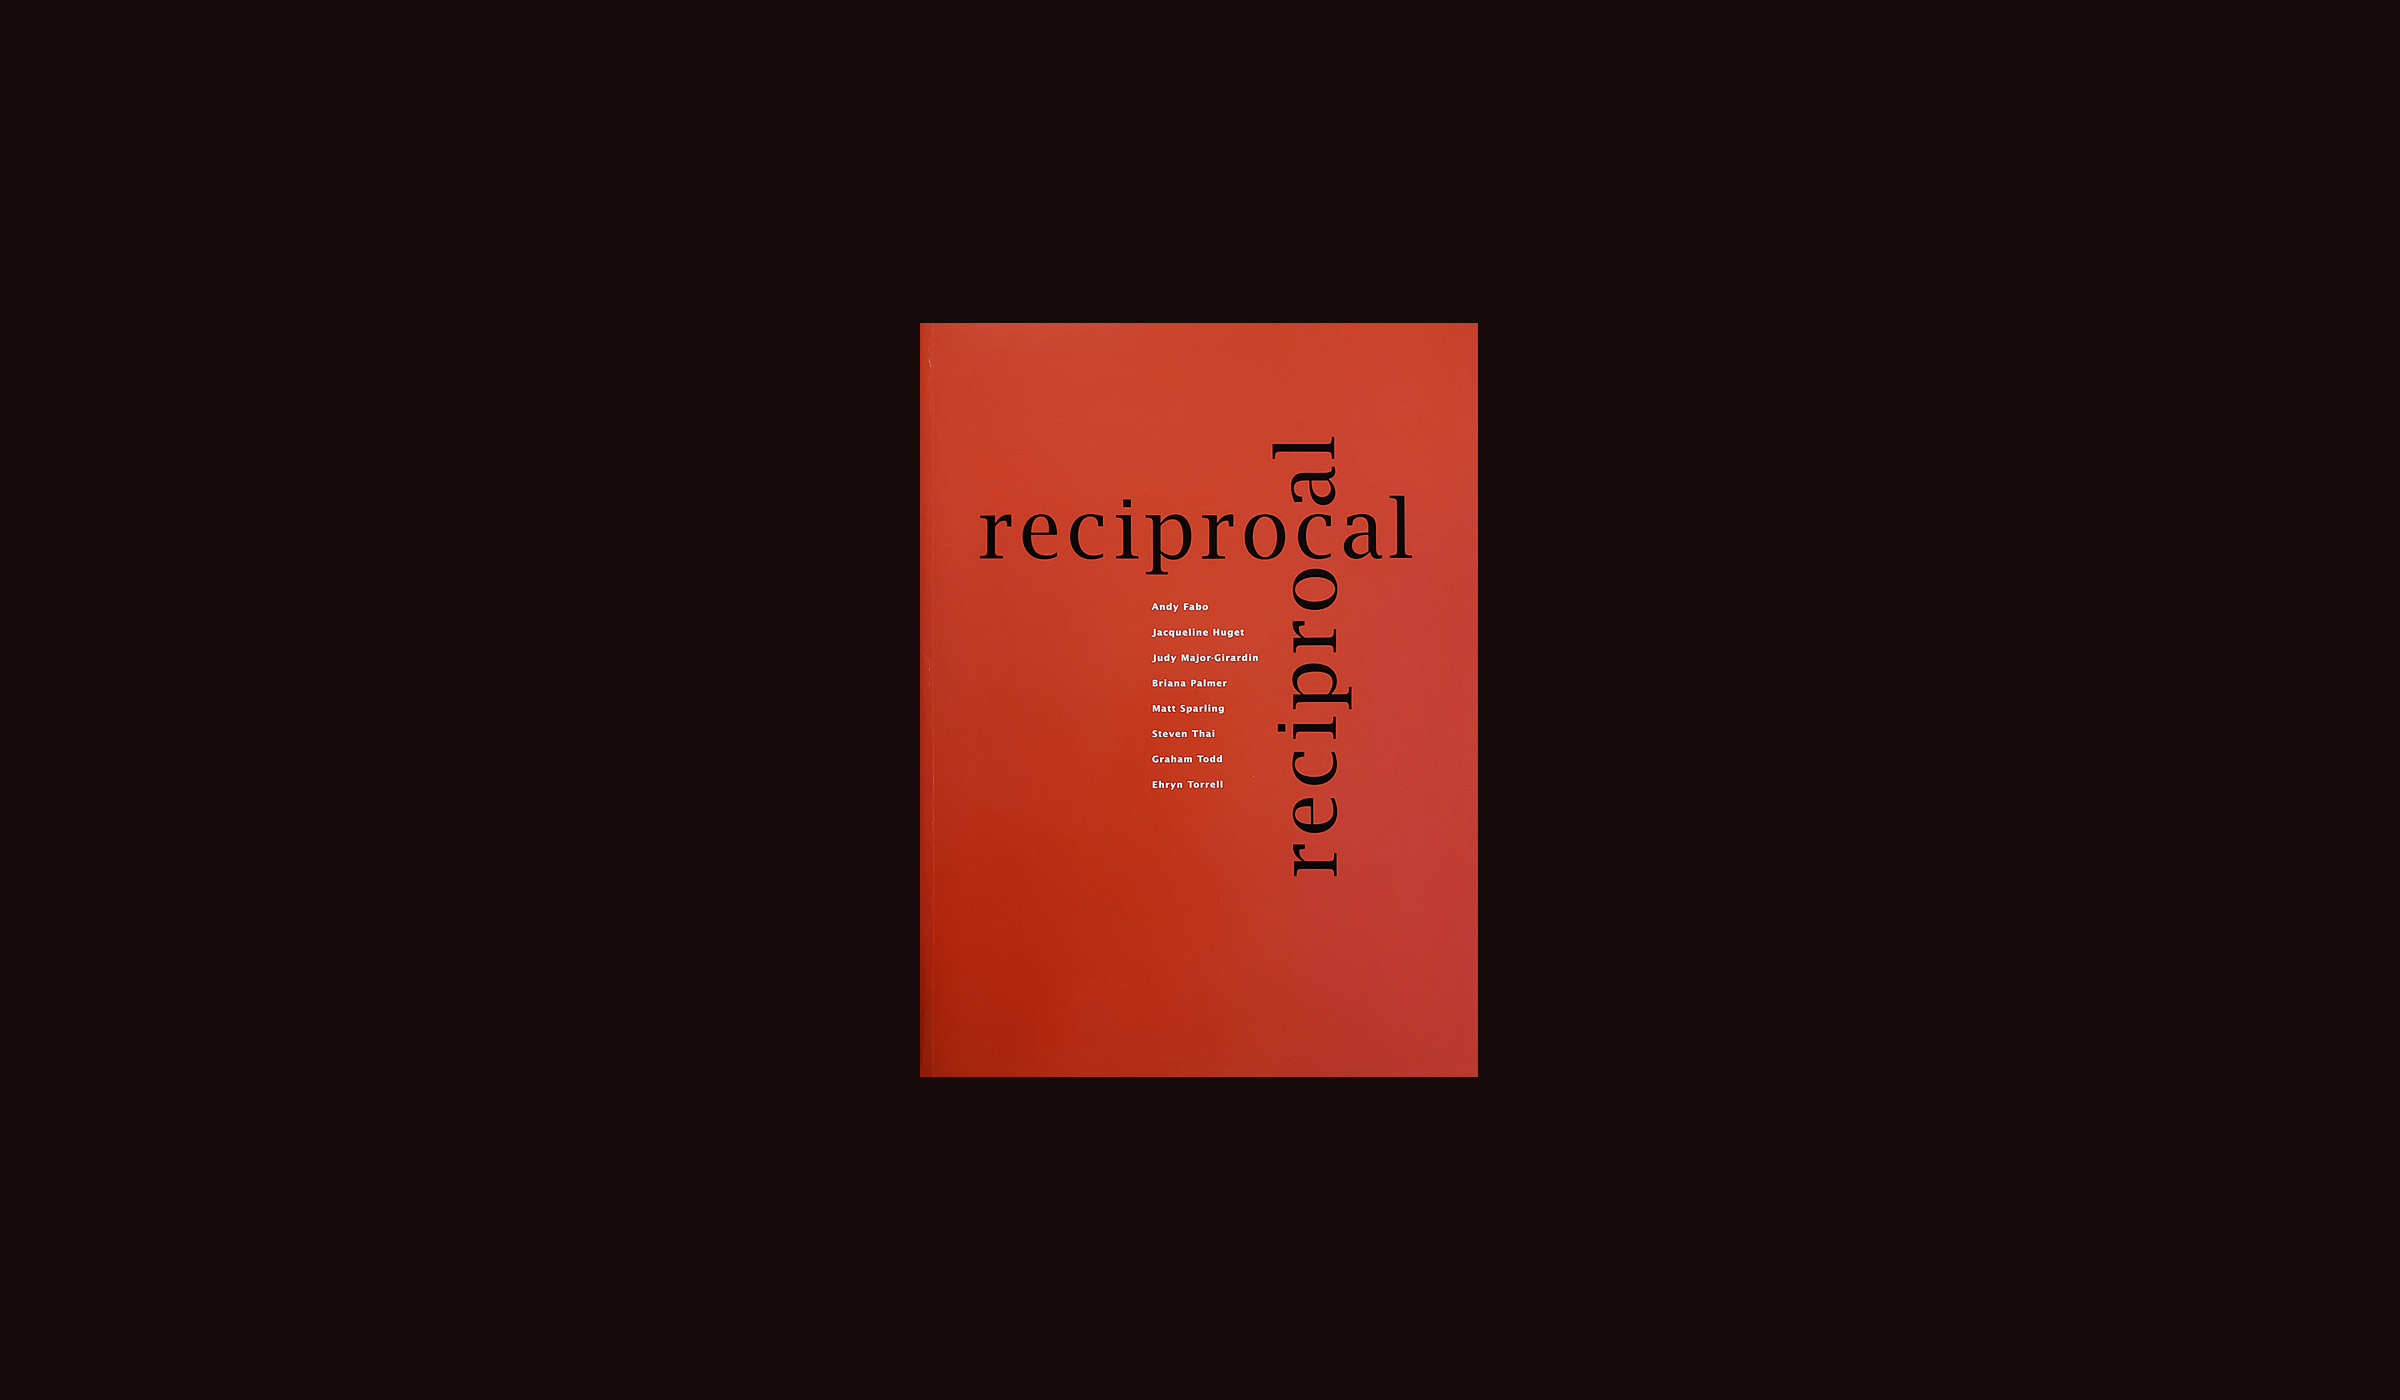 Book cover - black text on red background